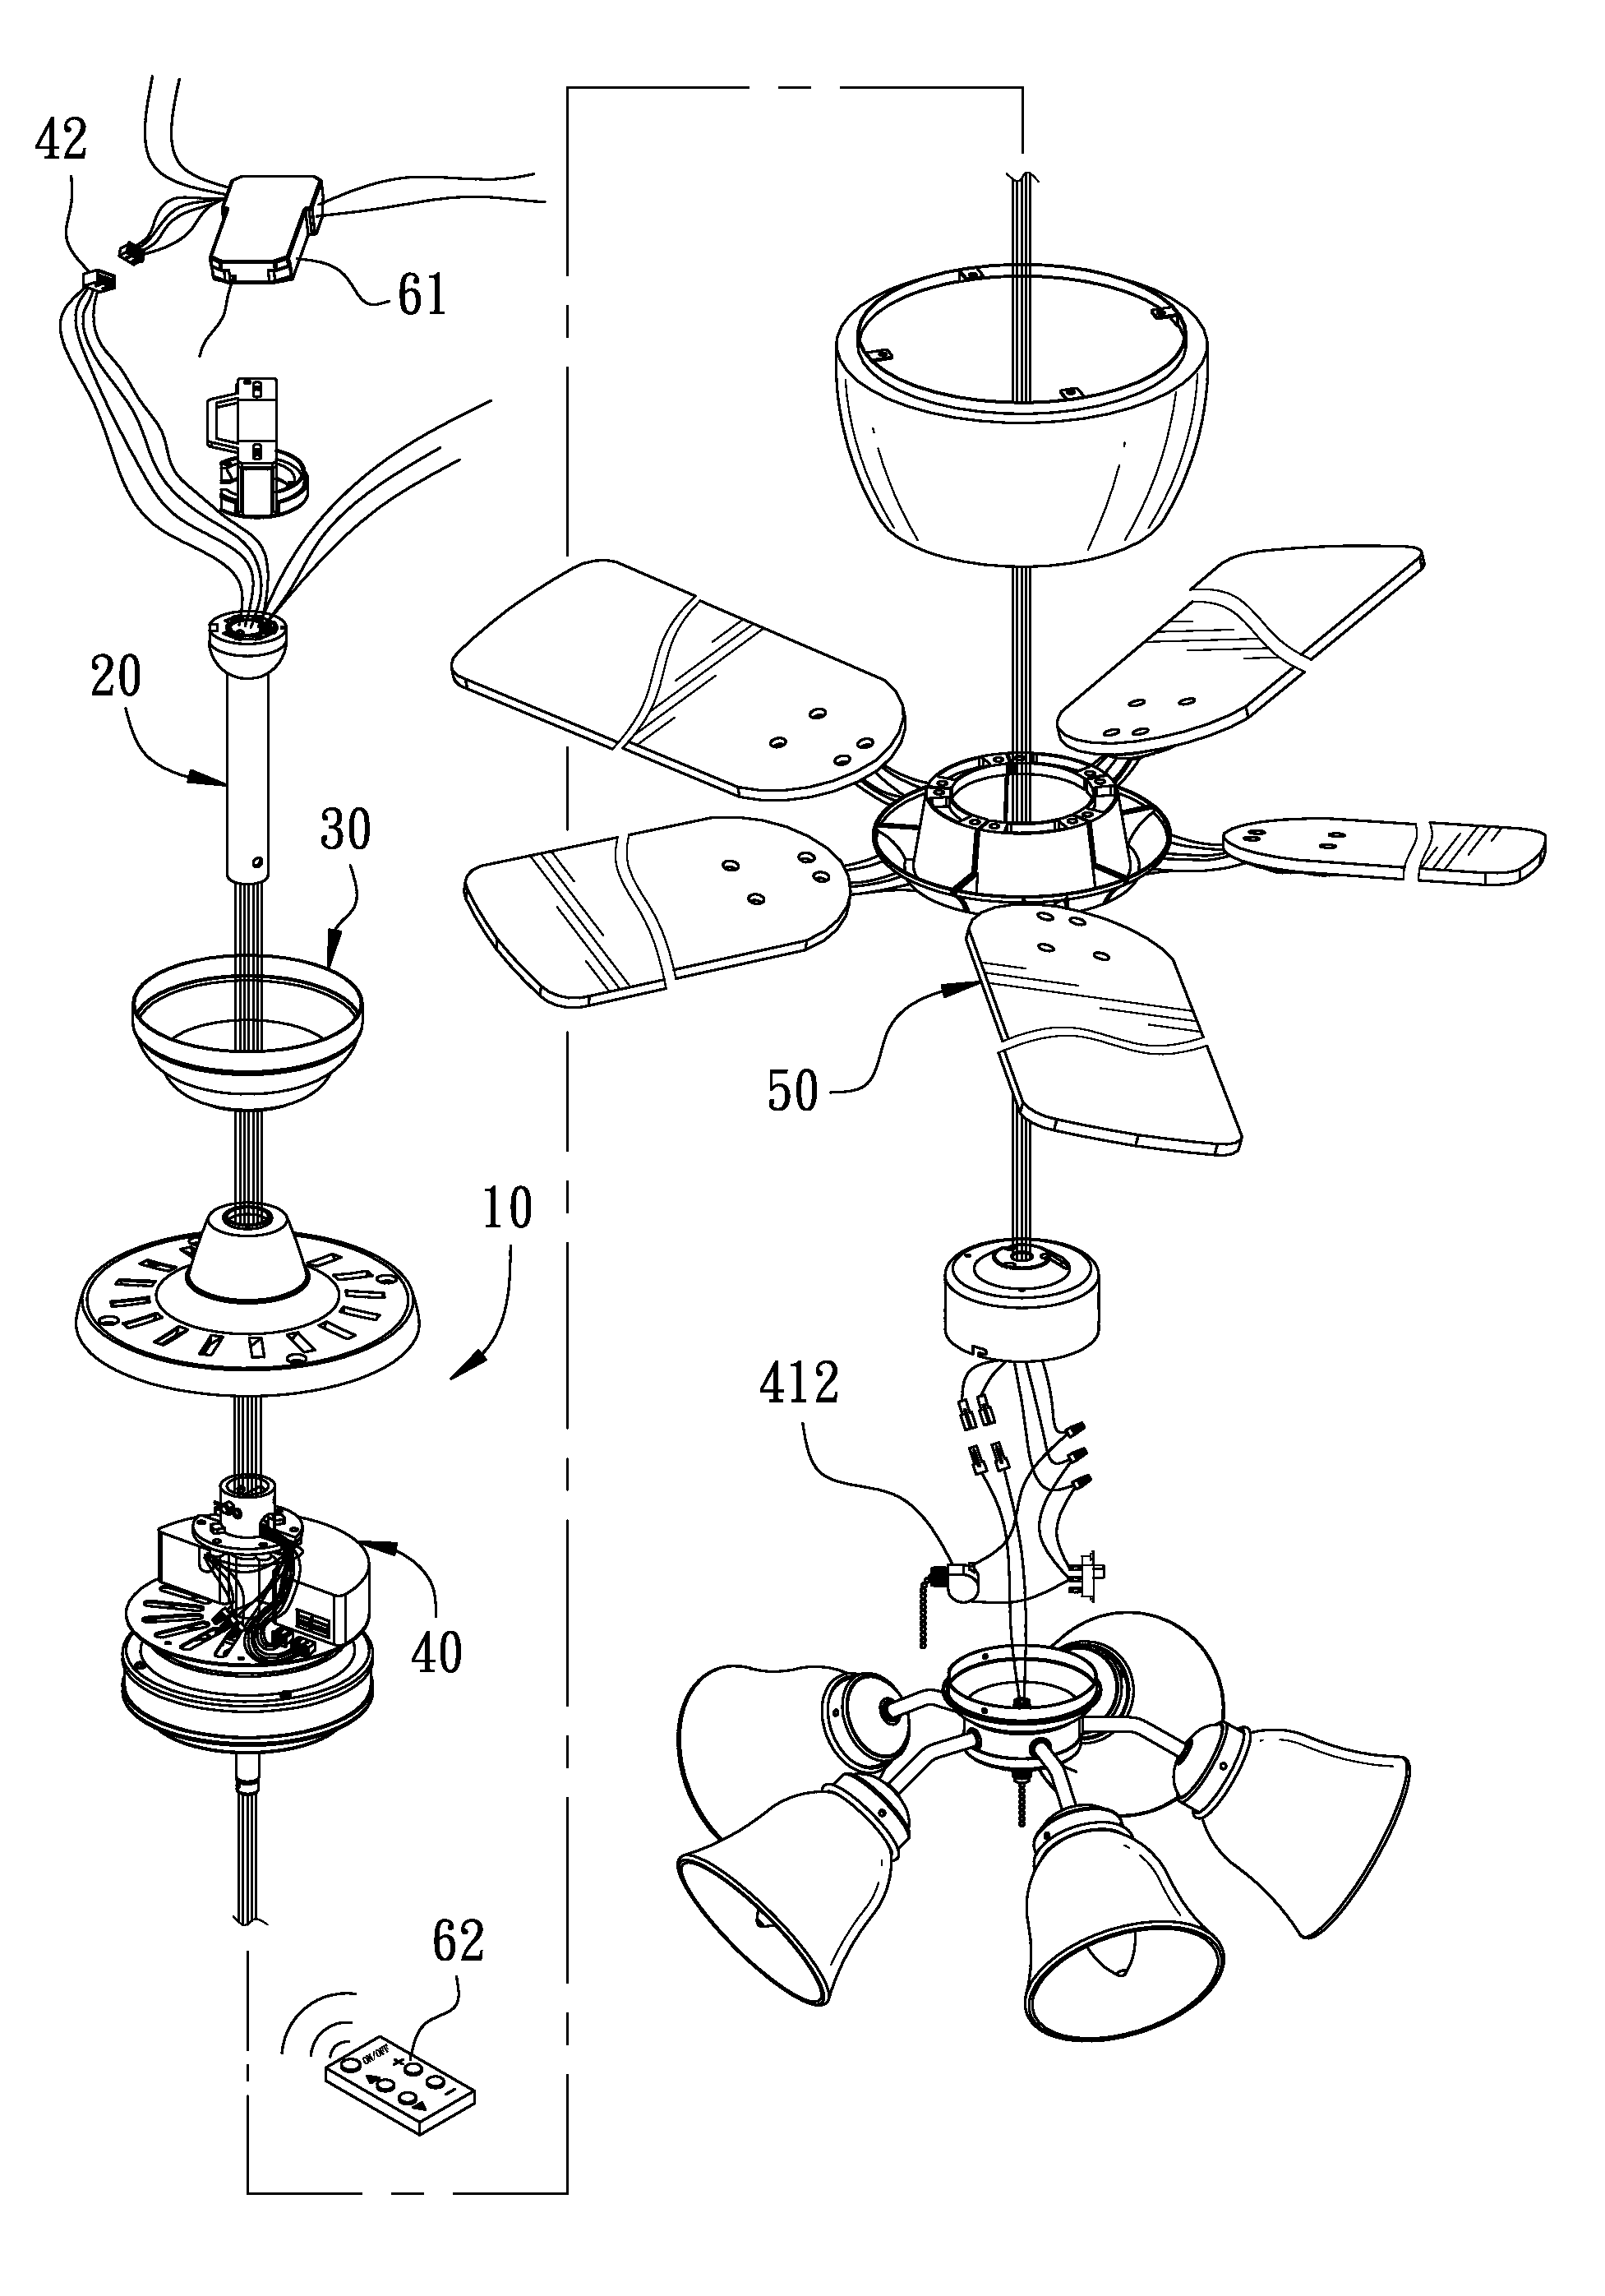 Changeover device of pull cord control and wireless remote control for a DC brushless-motor ceiling fan